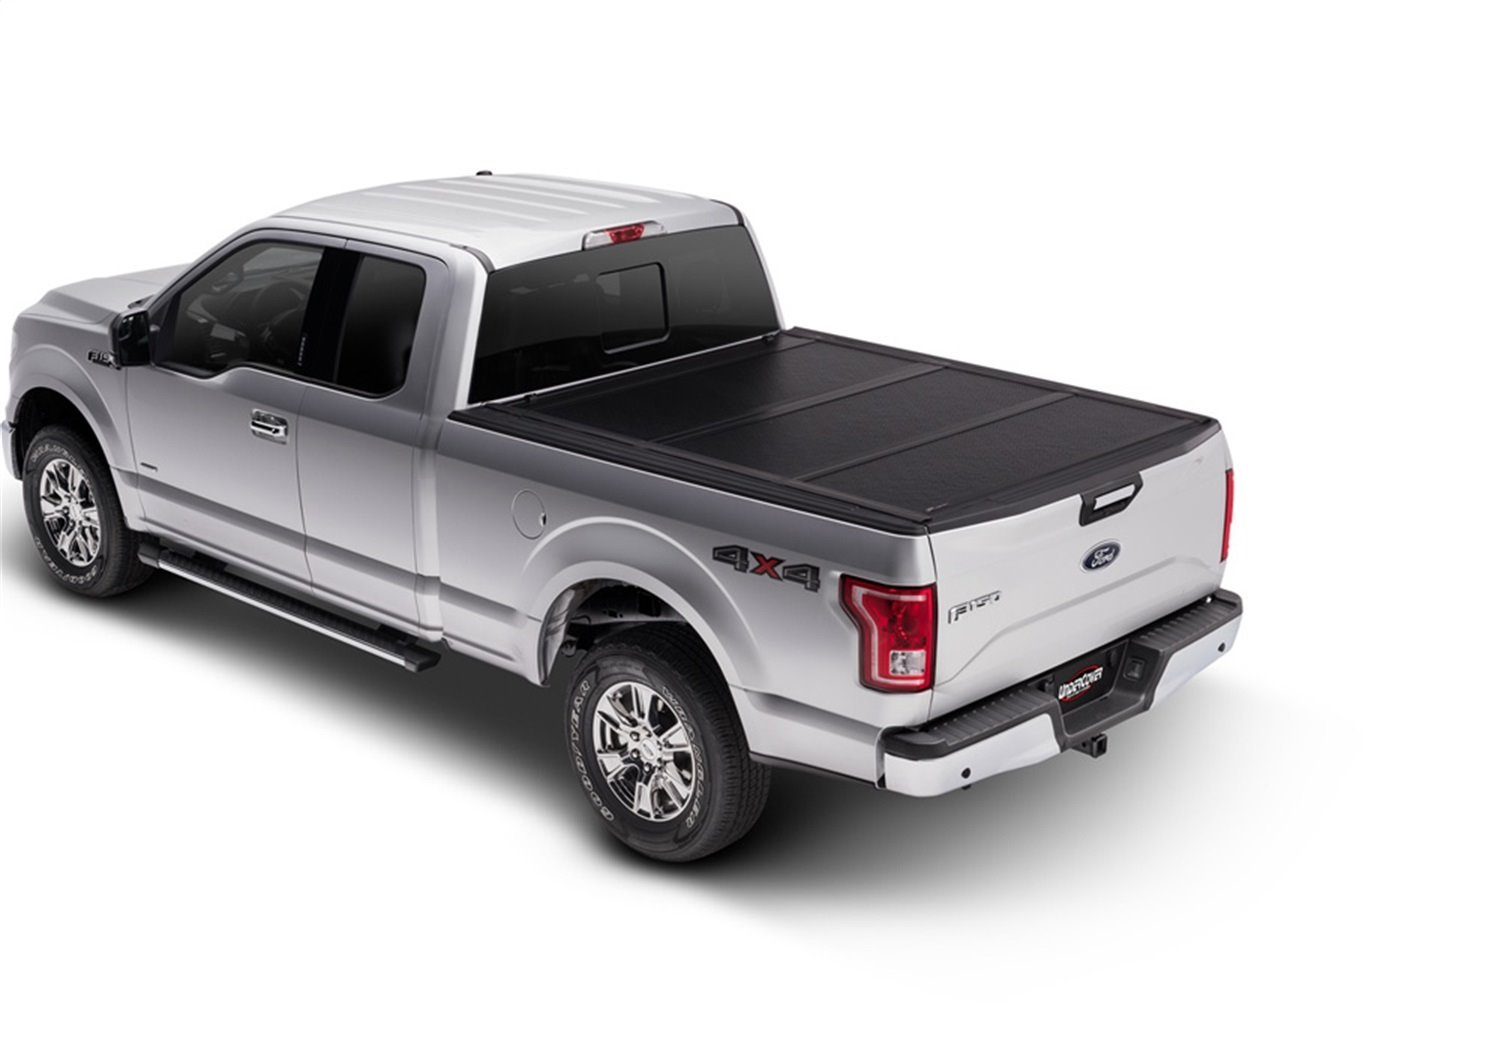 FX21029 Flex Hard Folding Cover, Fits Select Ford F-150 5'7" Bed (Includes Lightning) EXT/Crew, Black Textured